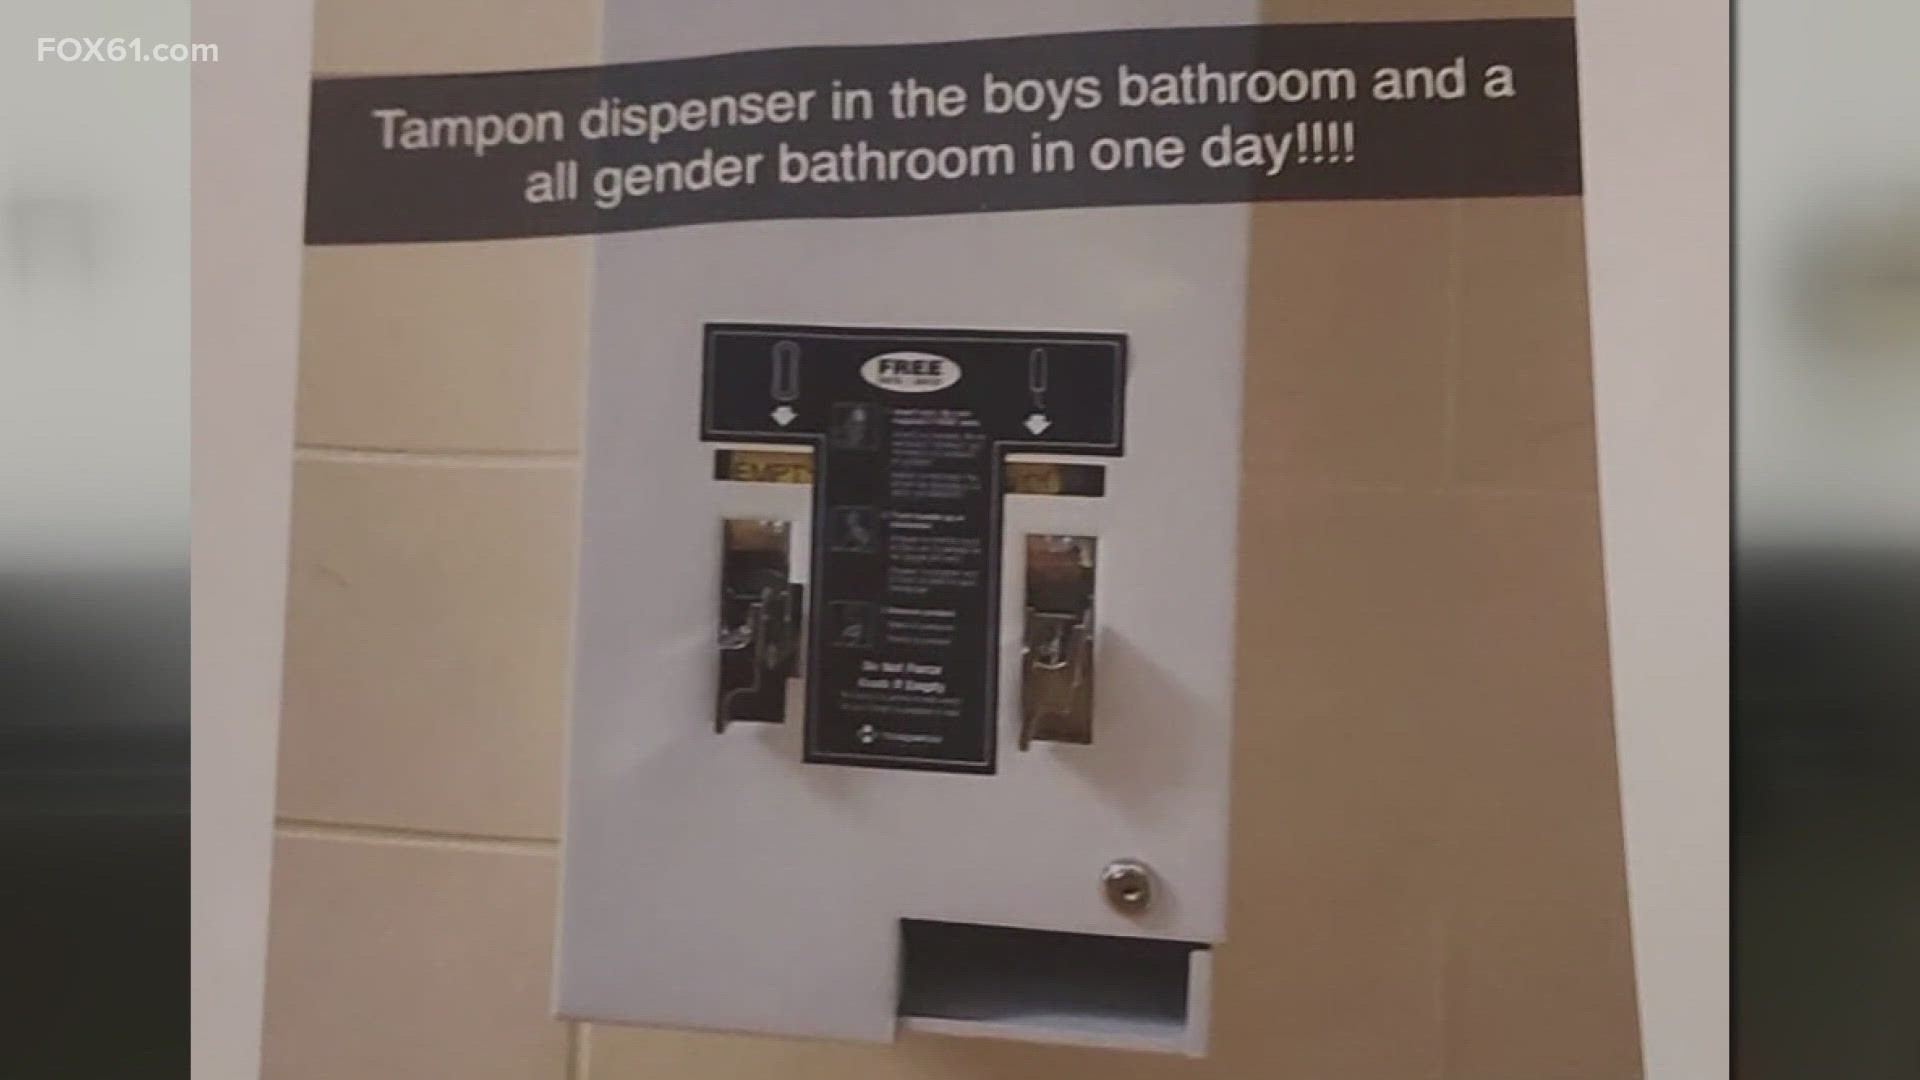 A Connecticut high school makes national news because of a vandalism incident. Someone ripped off a newly installed tampon dispenser in a boys bathroom at Brookfield